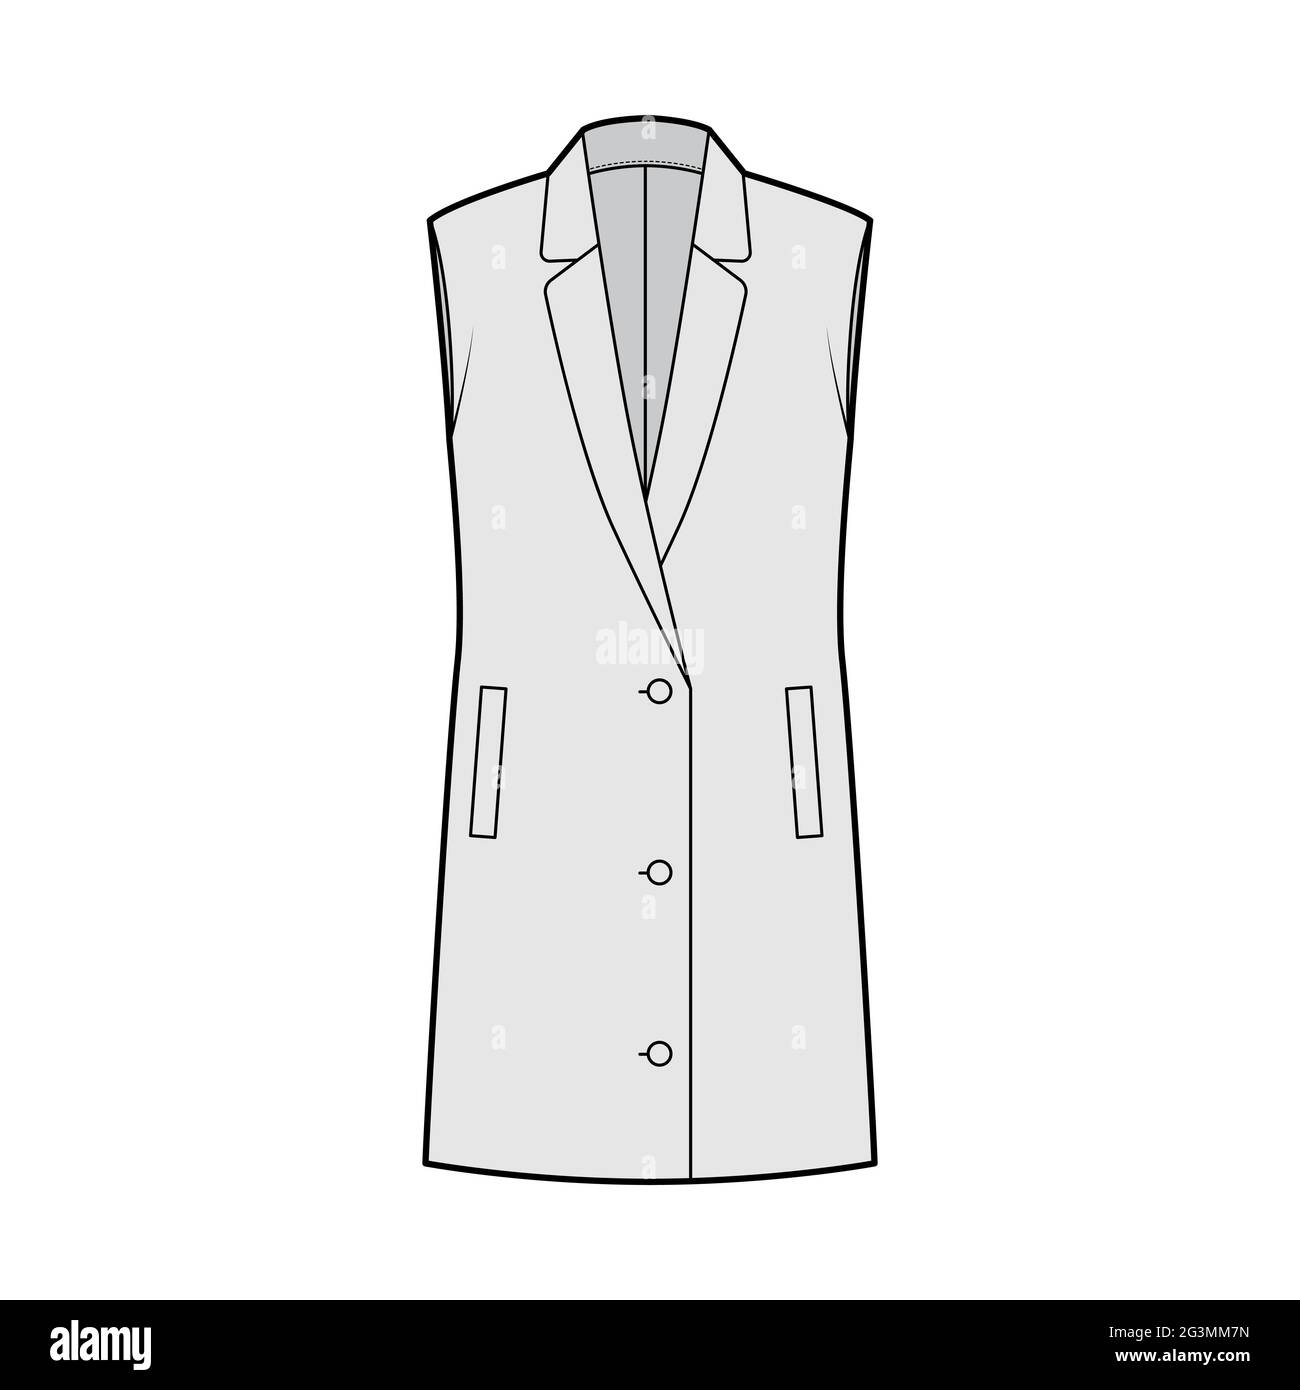 Sleeveless jacket lapelled vest waistcoat technical fashion illustration with button-up closure, pockets, oversized. Flat template front, grey color style. Women, men unisex top CAD mockup Stock Vector